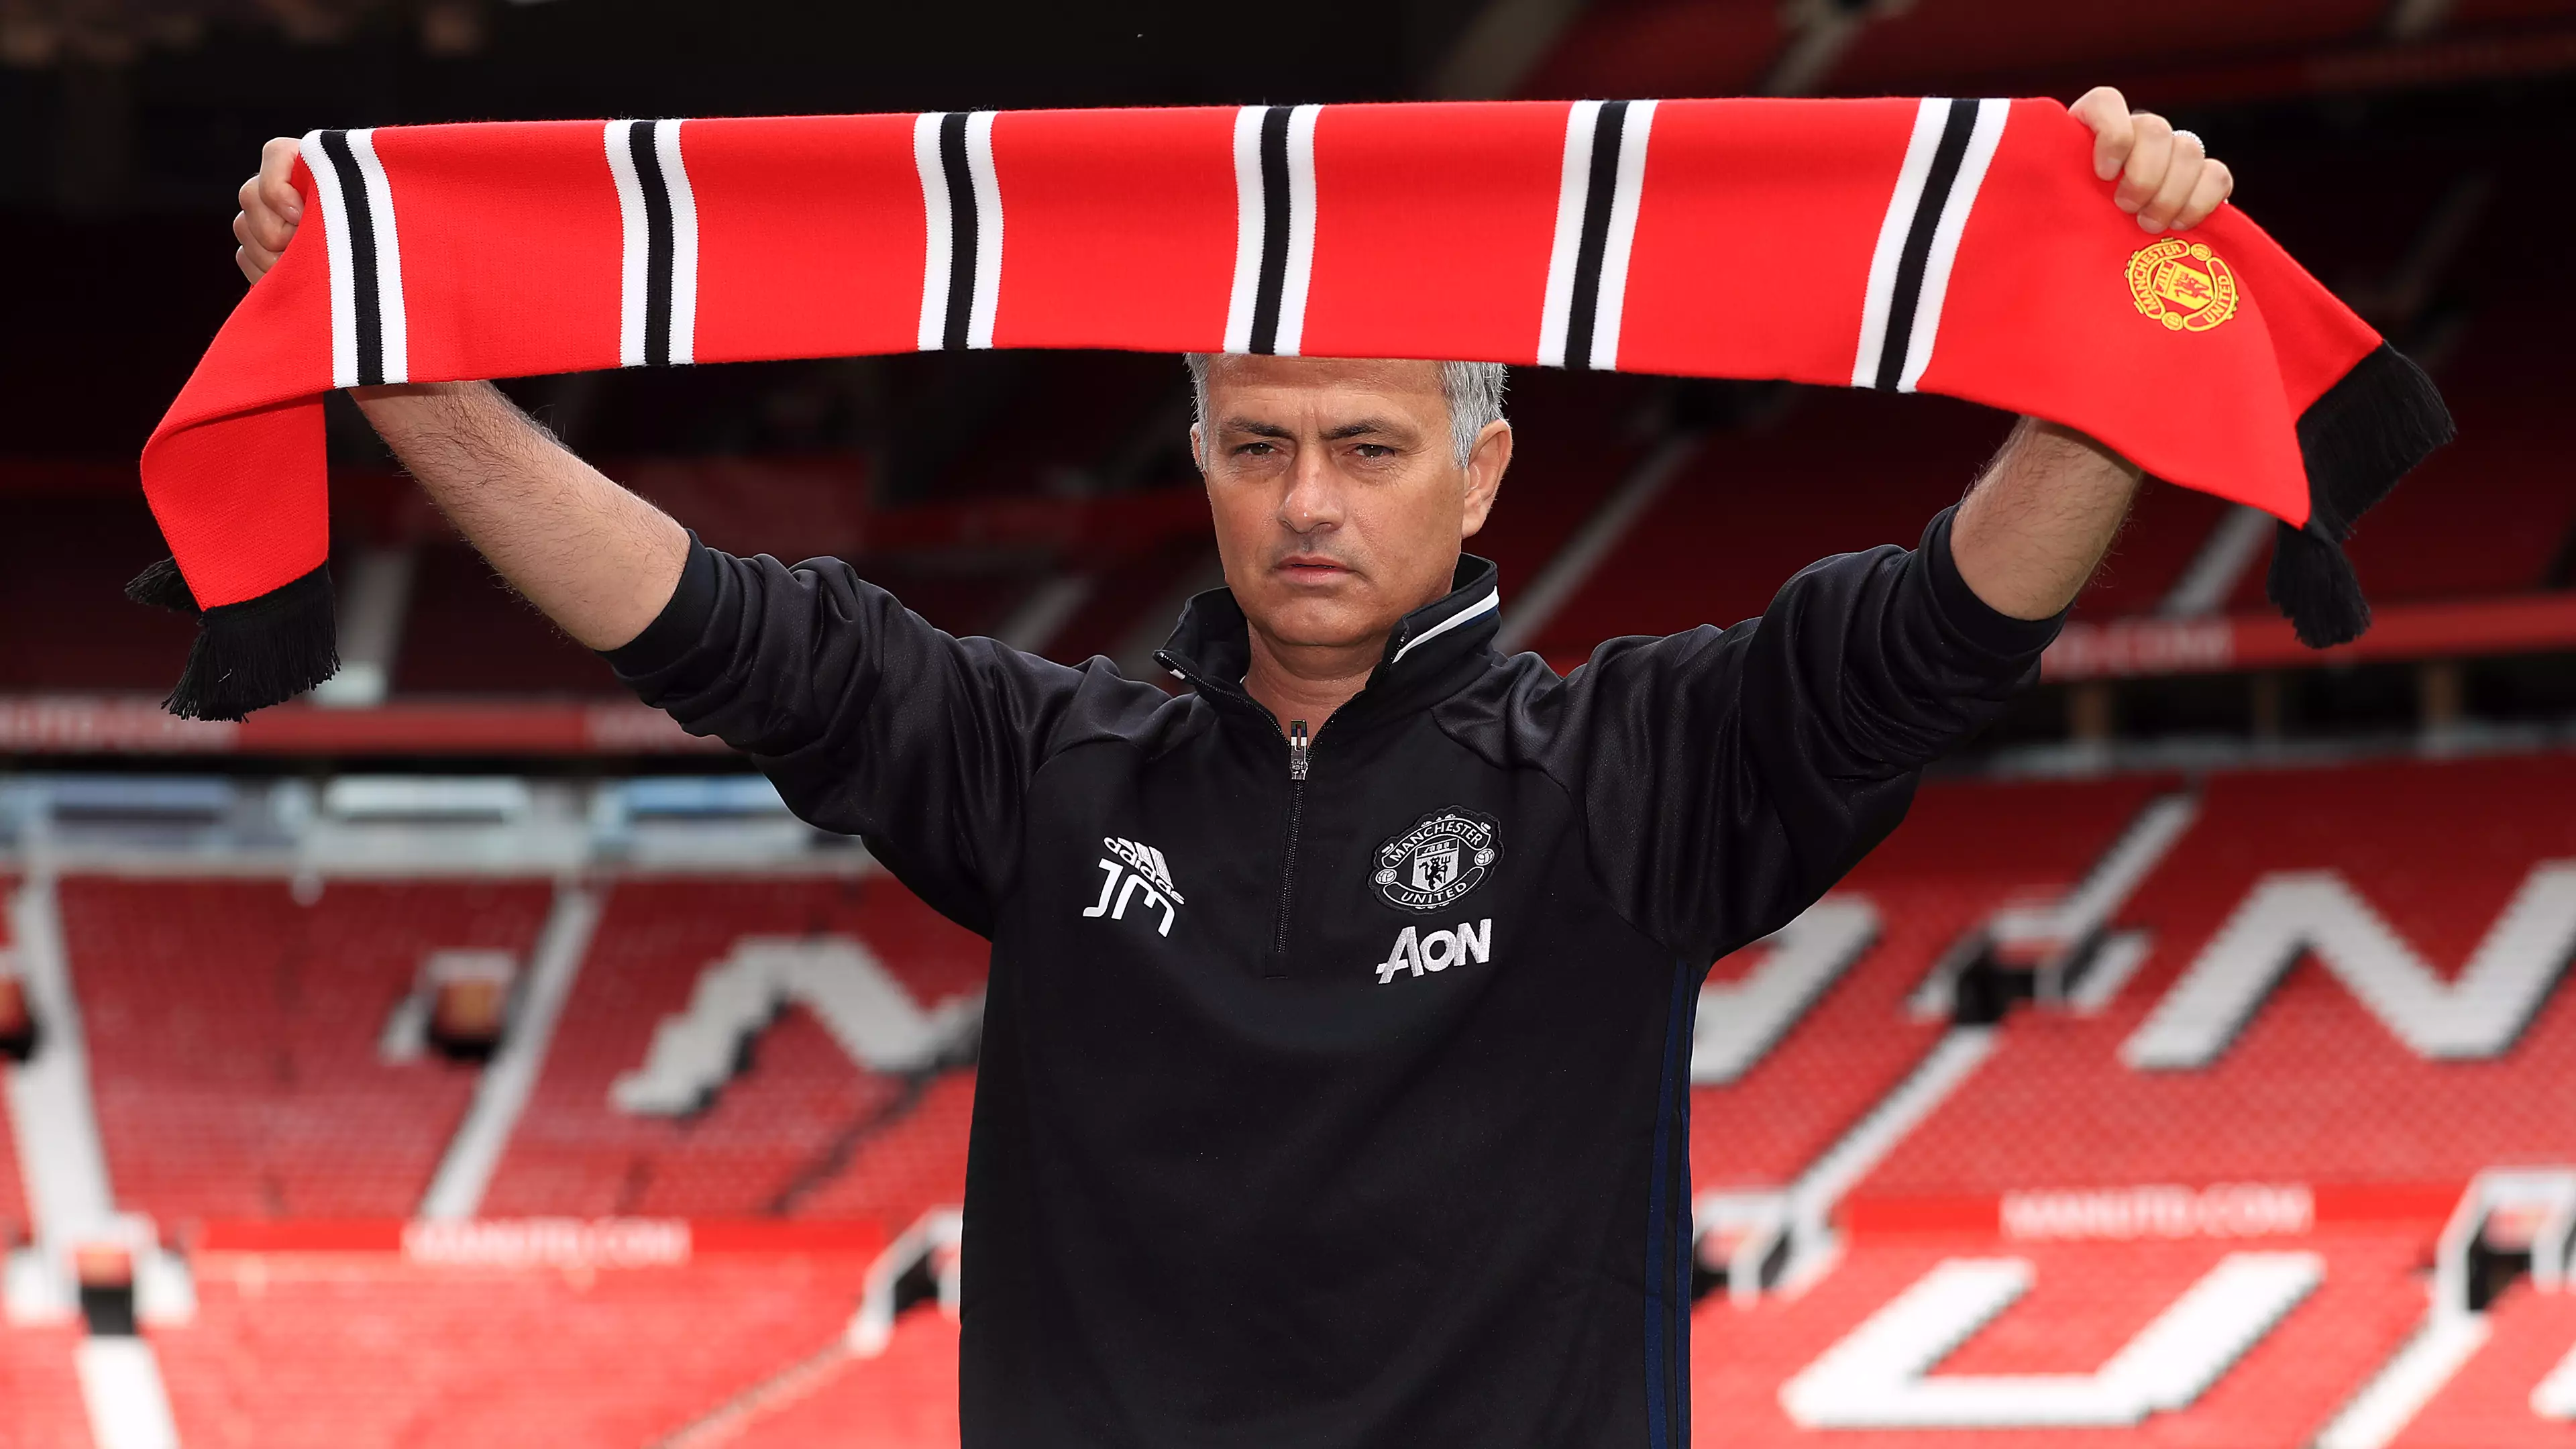 Where will Mourinho be unveiled next? Image: PA Images